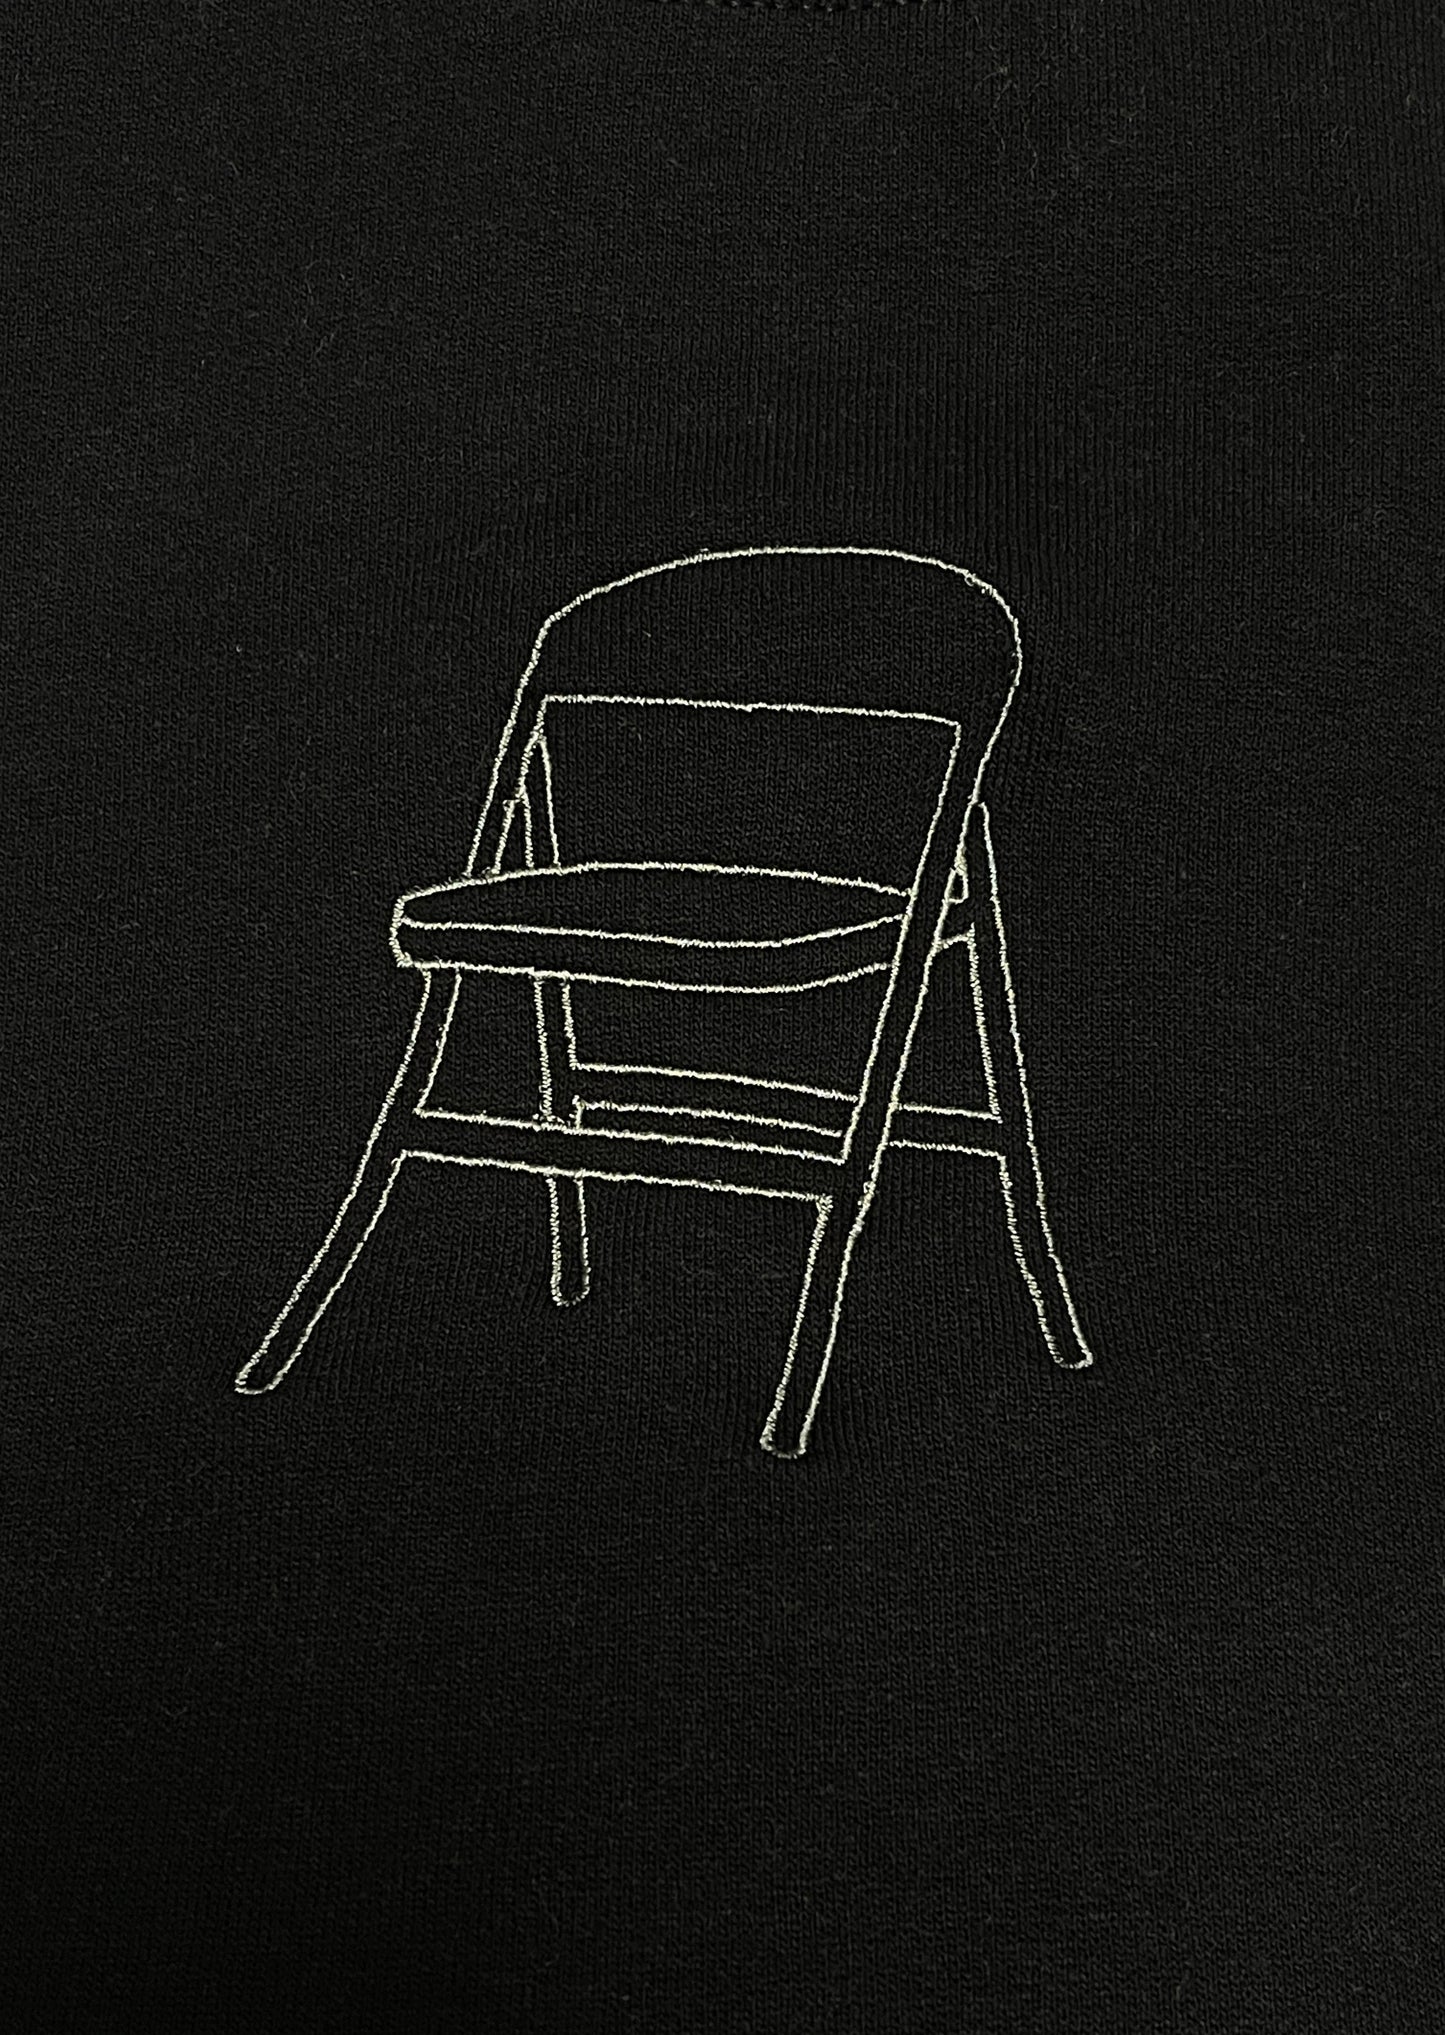 Foldable Chair Embroidery